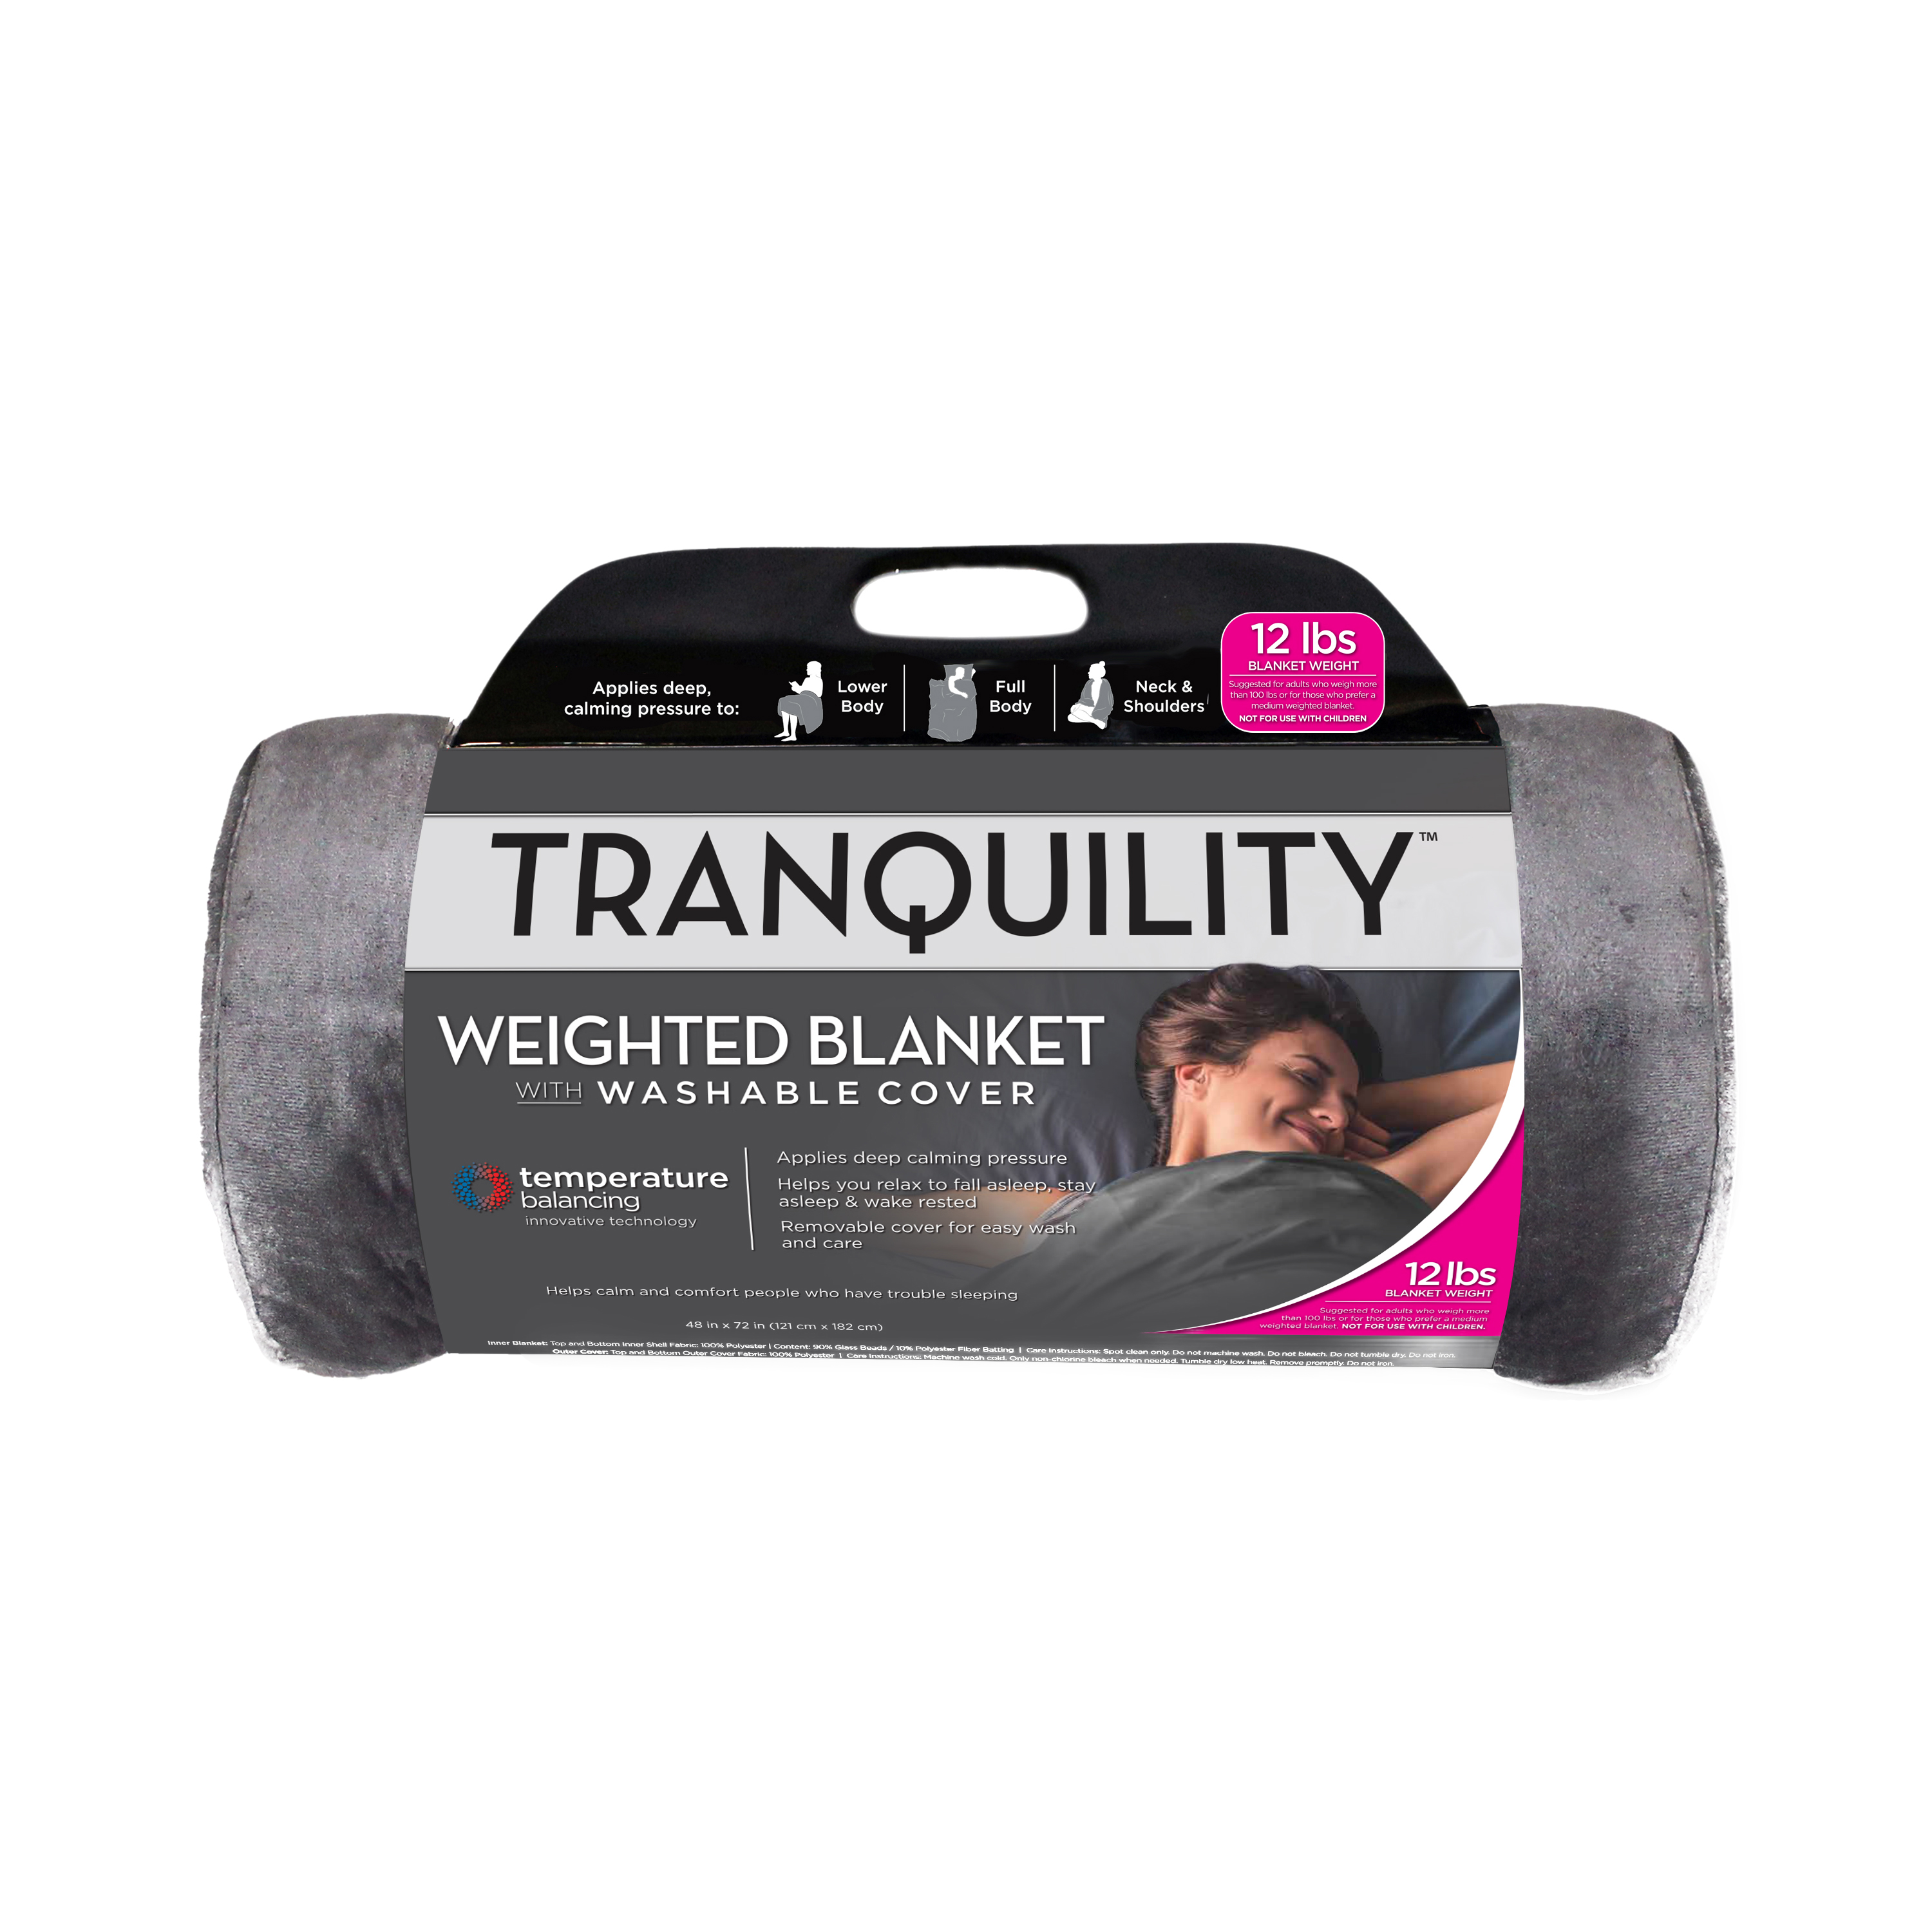 Tranquility, Antimicrobial, Temperature Balancing, Weighted Blanket with Washable Cover, 12 lbs - image 1 of 10